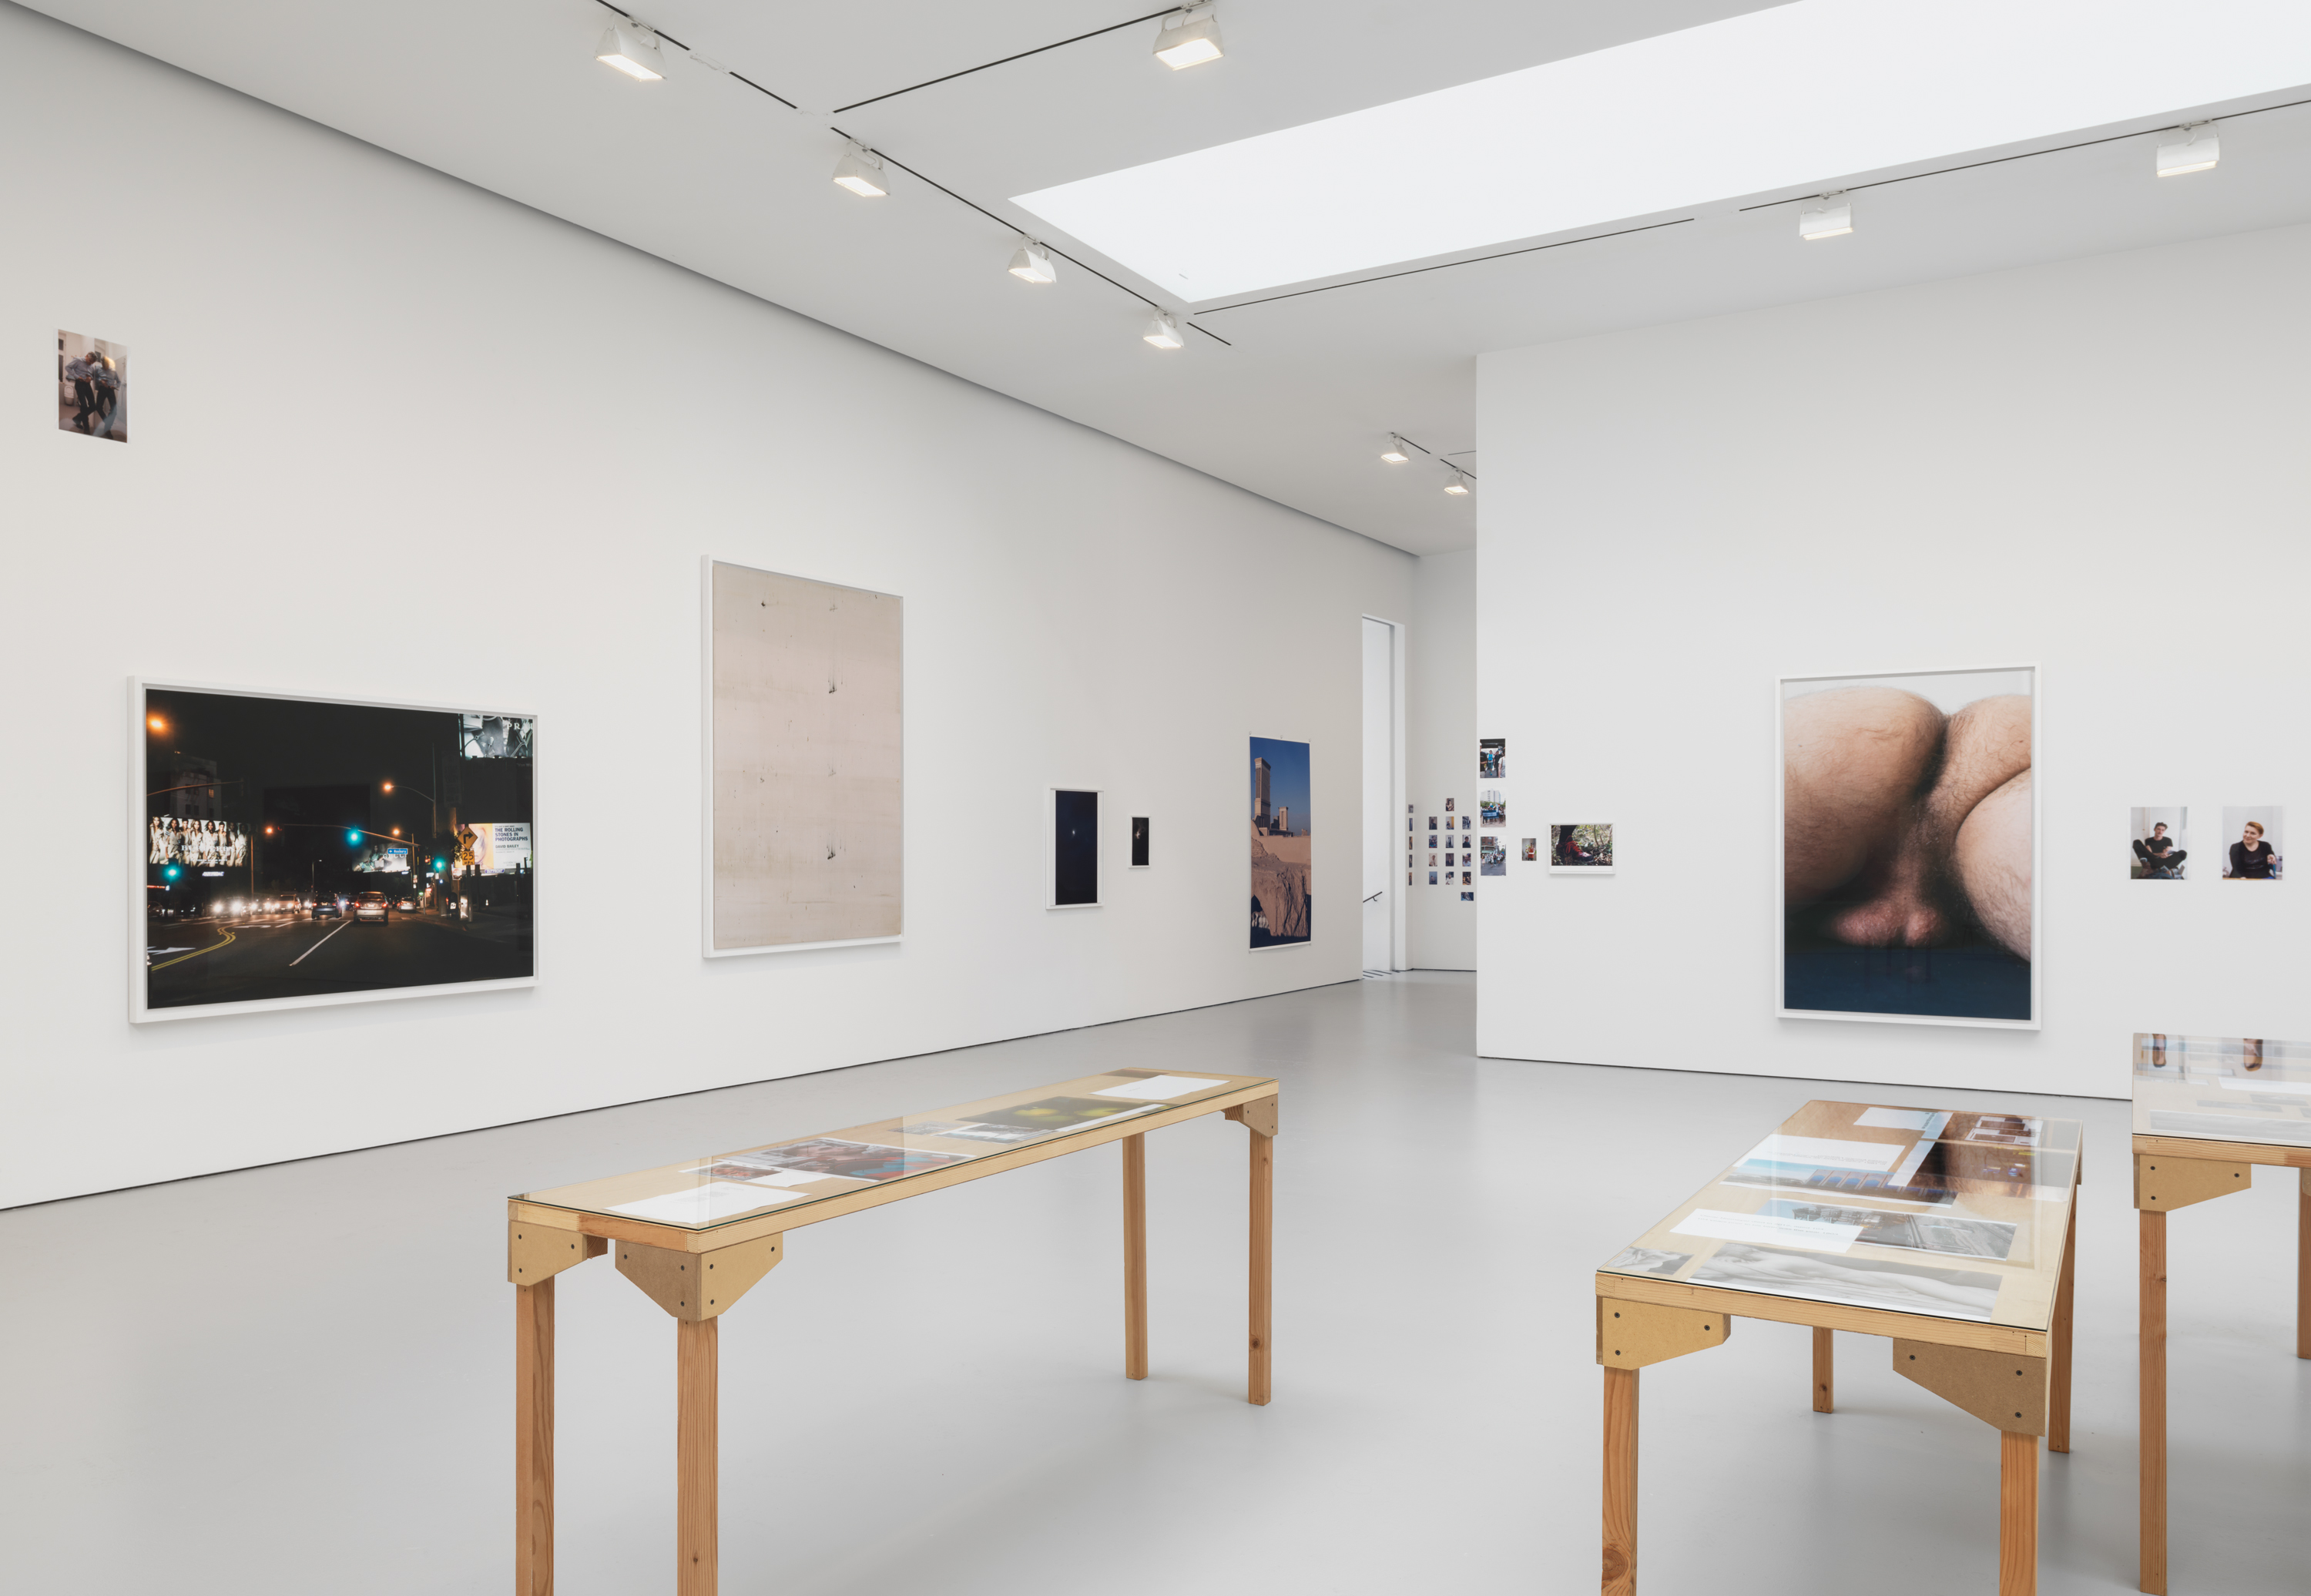 Installation view from the 2015 solo exhibition PCR at David Zwirner, New York. Nackt, 2, (2014), by Wolfgang Tillmans can be seen on the far wall. Courtesy David Zwirner, New York